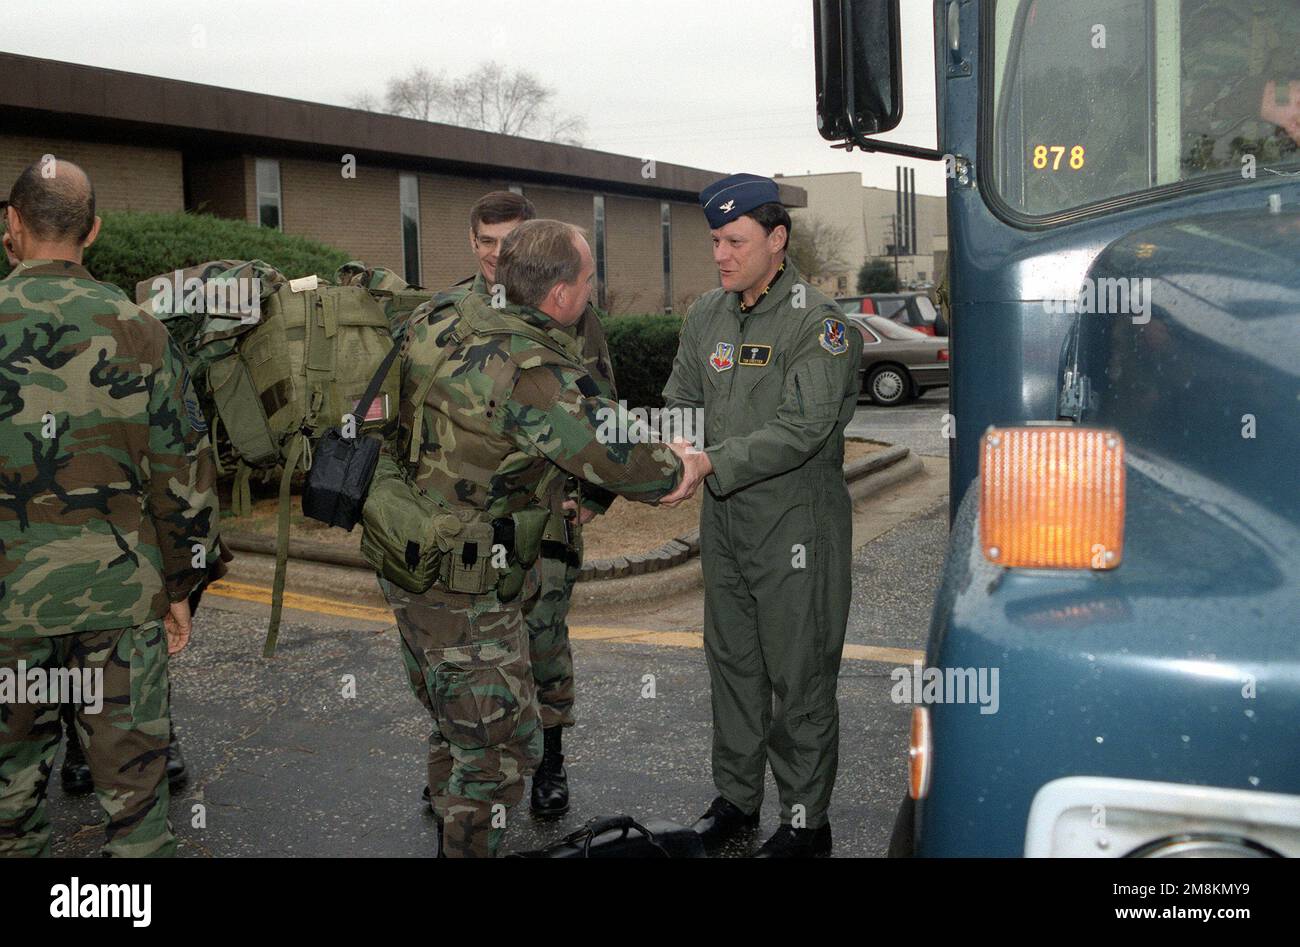 Colonel Tom Chester, Commander, 23rd Aeromedical Evacuation Squadron gives farewell, good luck handshake to Major Richard Stefanski, OIC of the Mobile Aeromedical Staging Facility (MASF) as he prepares to board the bus to transport him to the aircraft and then deployment to Ramstein Air Base, Germany. Major Stefanski will lead his staff and the MASF to Tuzla Air Base, Bosnia and there establish a Mobile Aeromedical Staging Facility (MASF) in support of Operation Joint Endeavor. Subject Operation/Series: JOINT ENDEAVOR Base: Pope Air Force Base State: North Carolina (NC) Country: United States Stock Photo